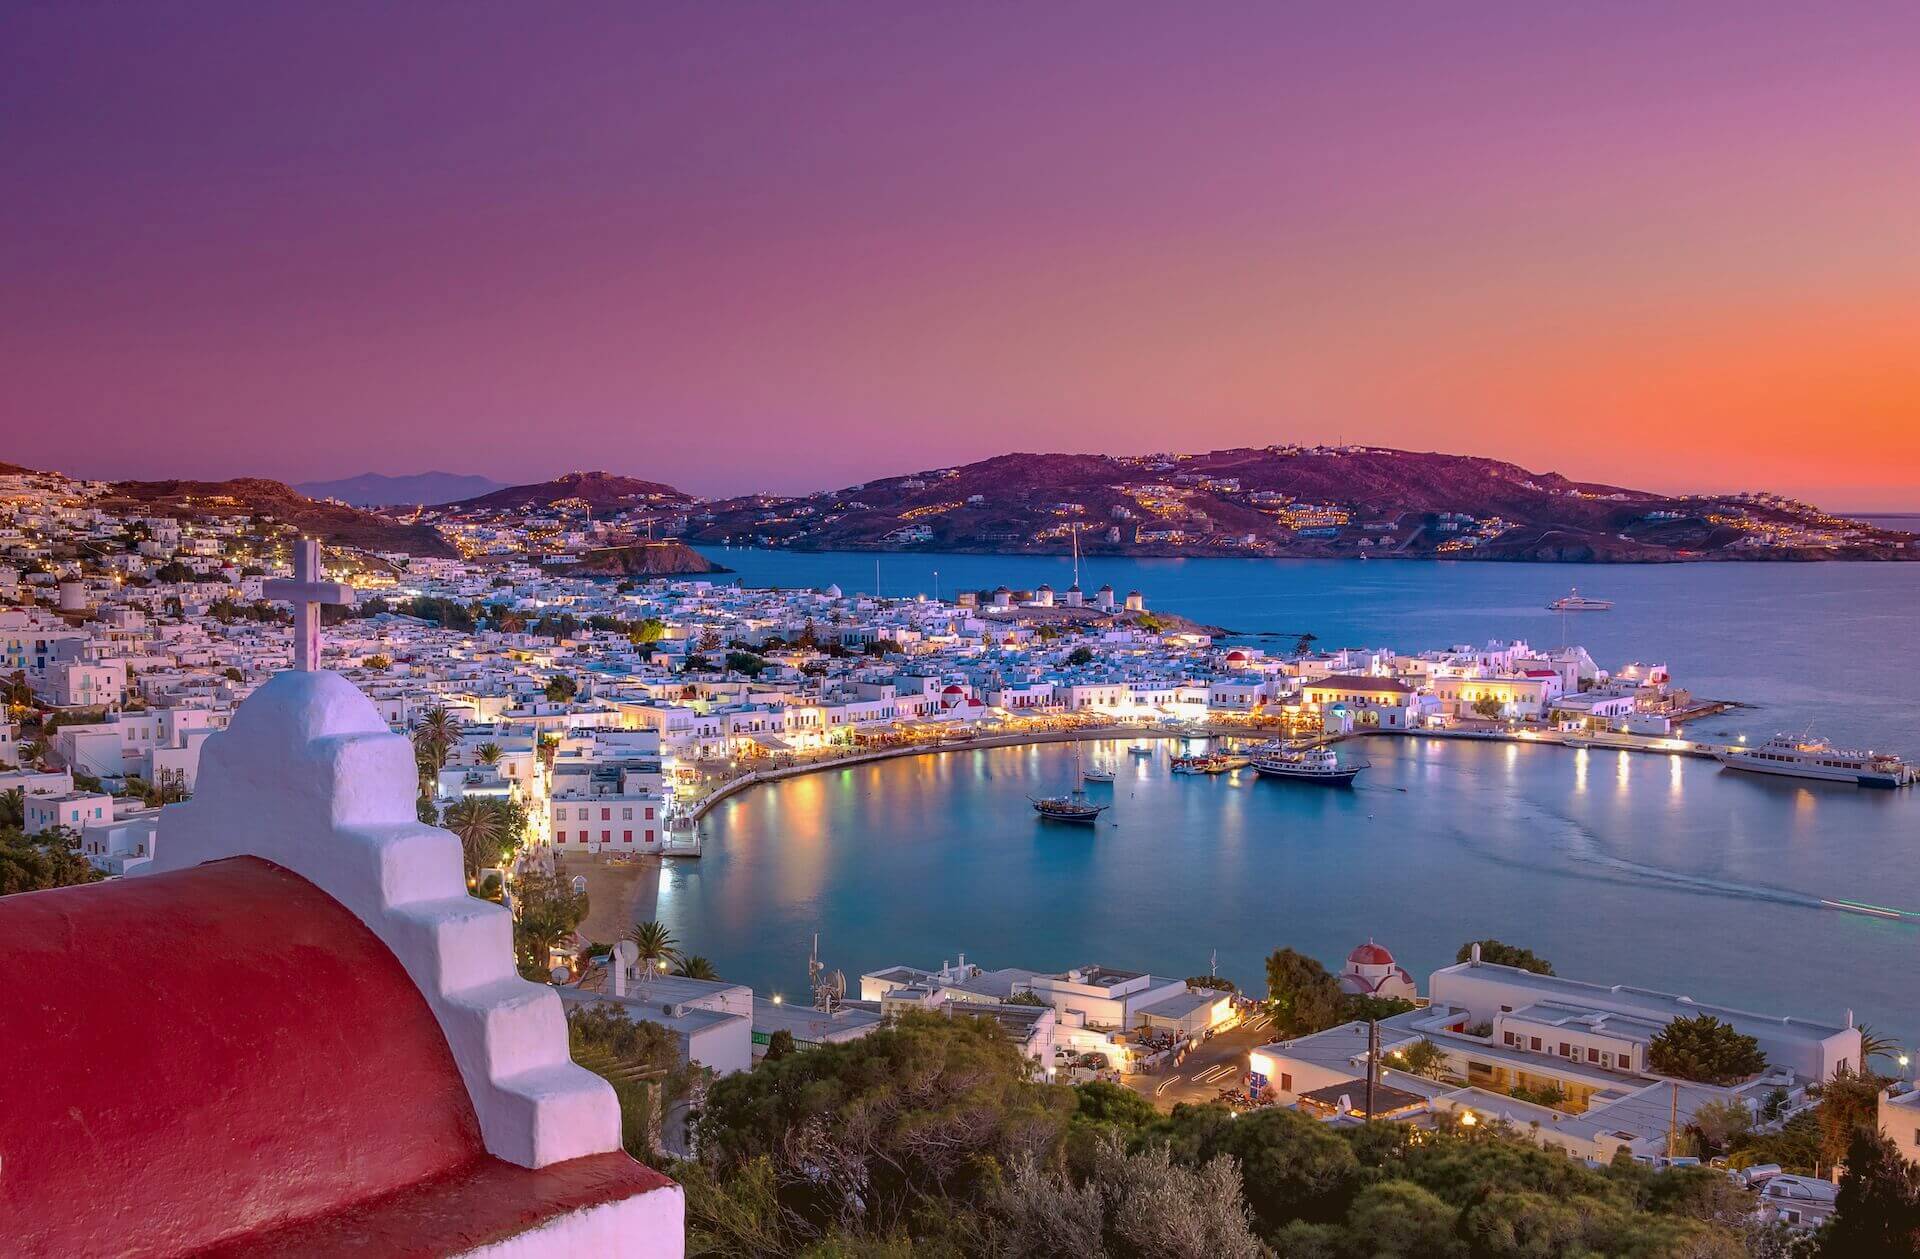 View of Mykonos from above at sunset